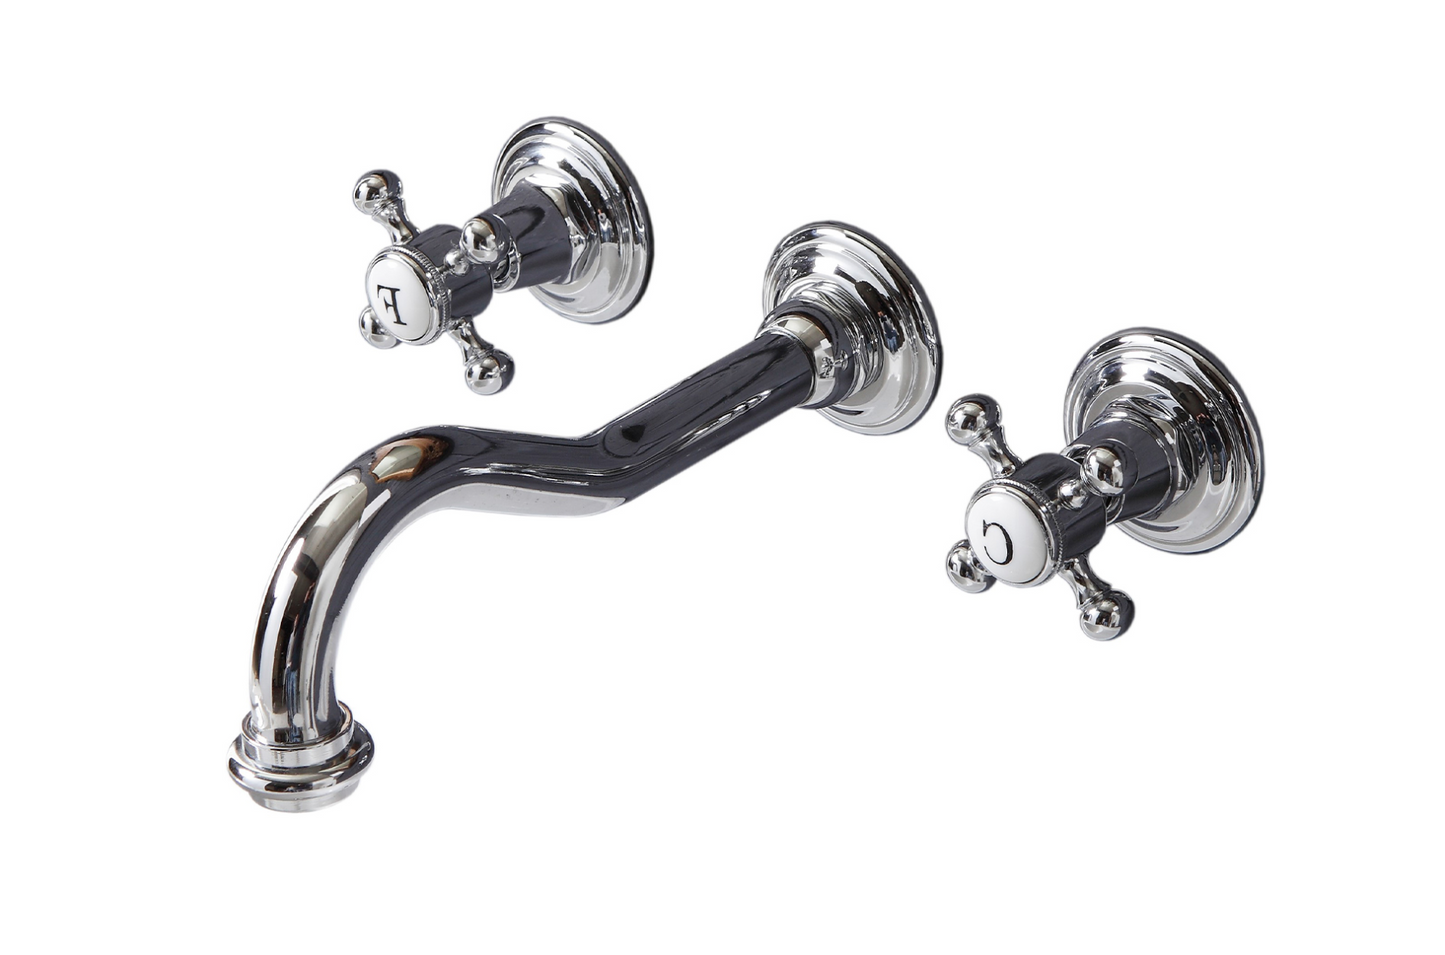 Balneo Toscia Vintage style built-in sink faucet